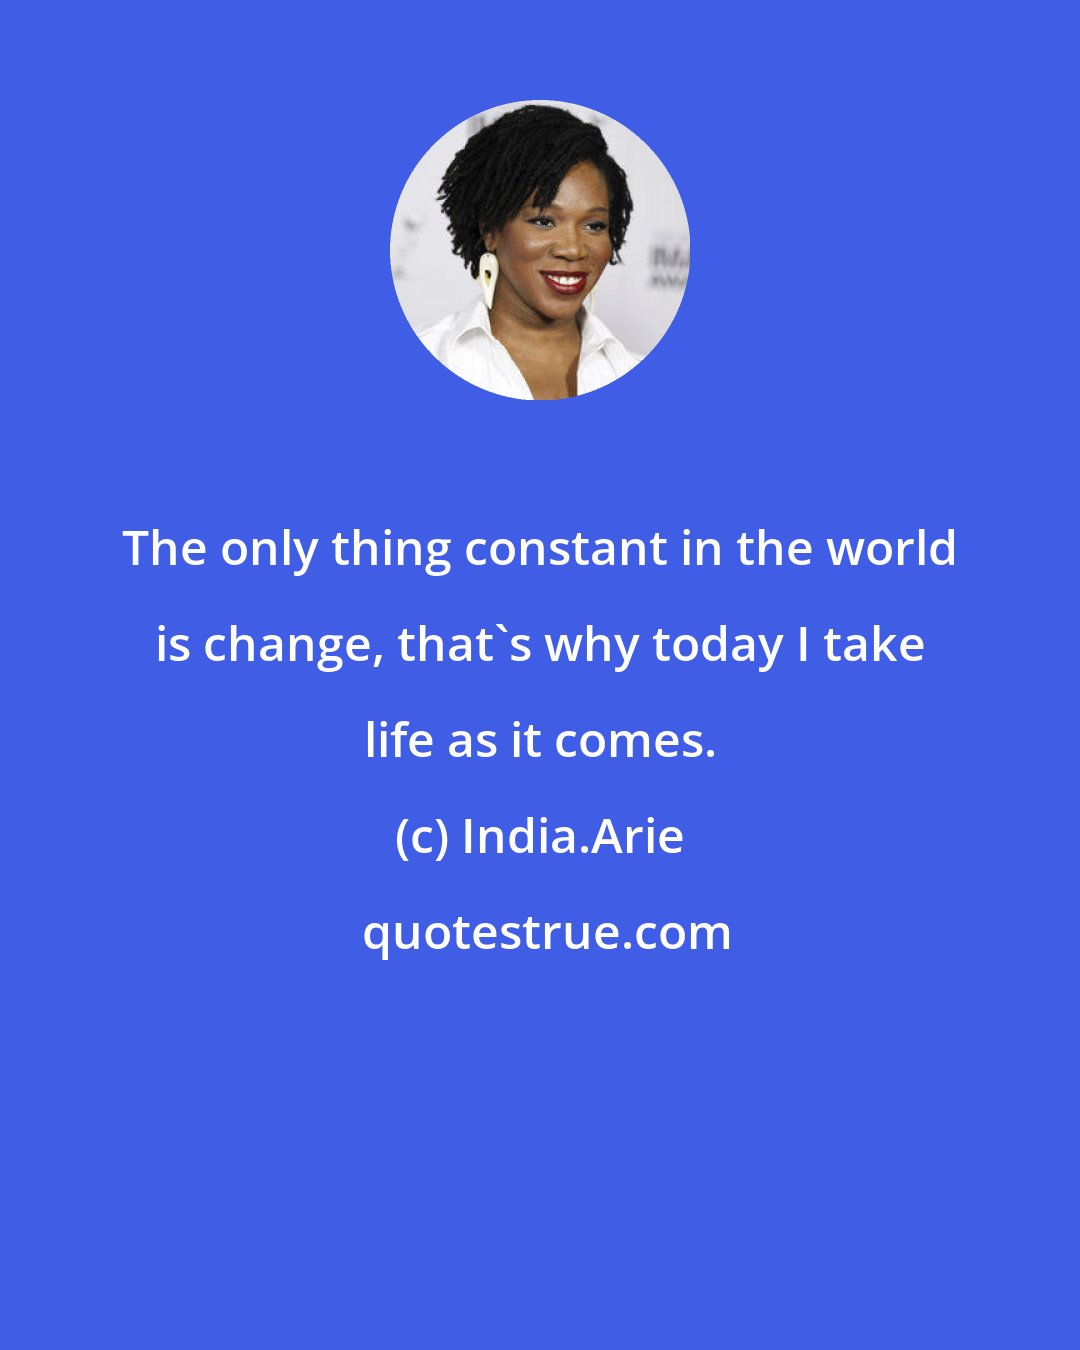 India.Arie: The only thing constant in the world is change, that's why today I take life as it comes.